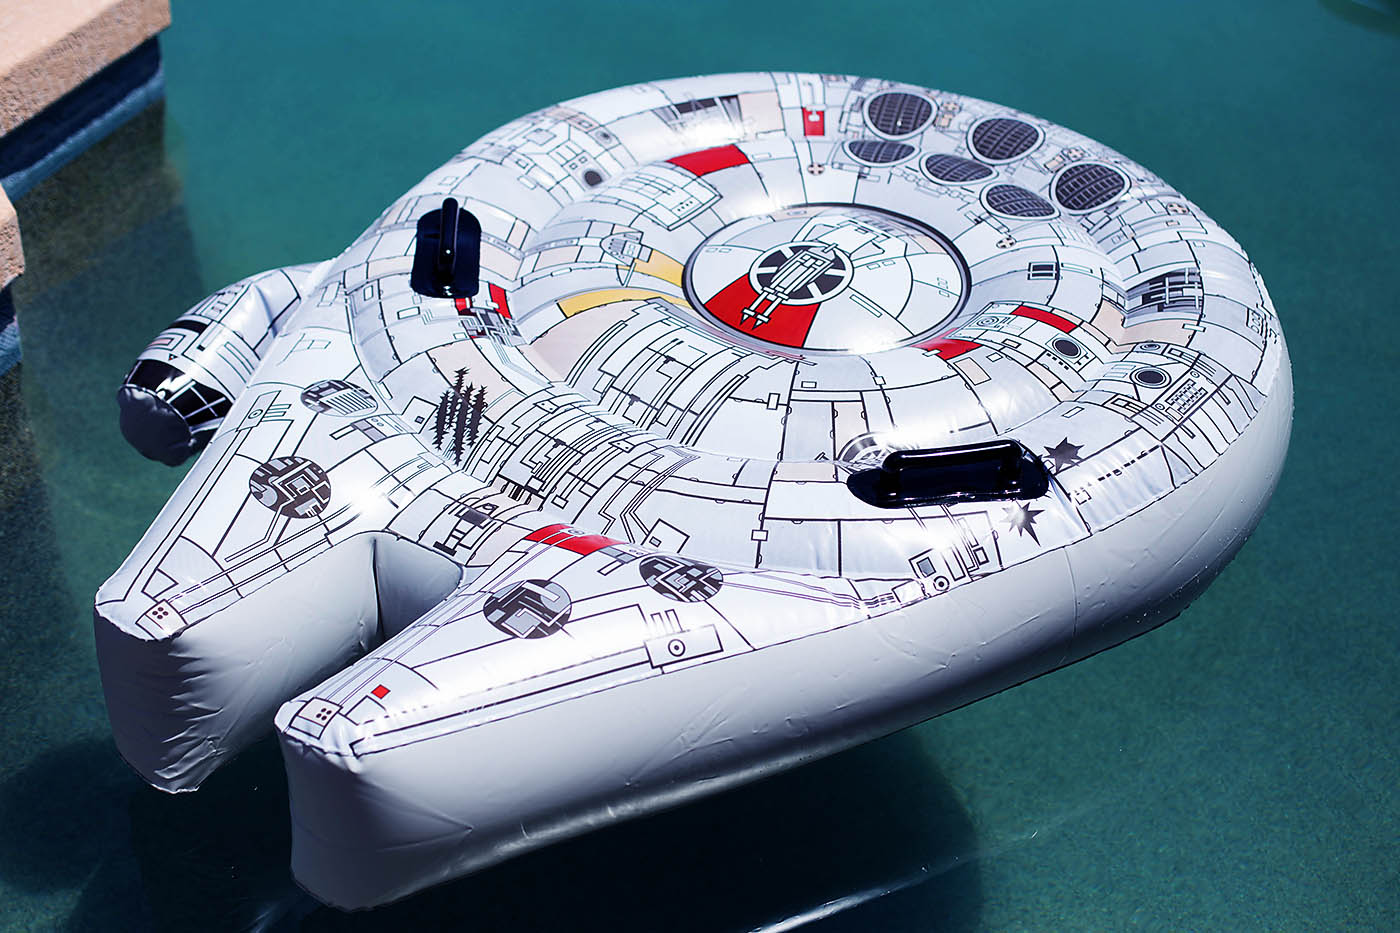 Millennium Falcon pool toy from Swimways